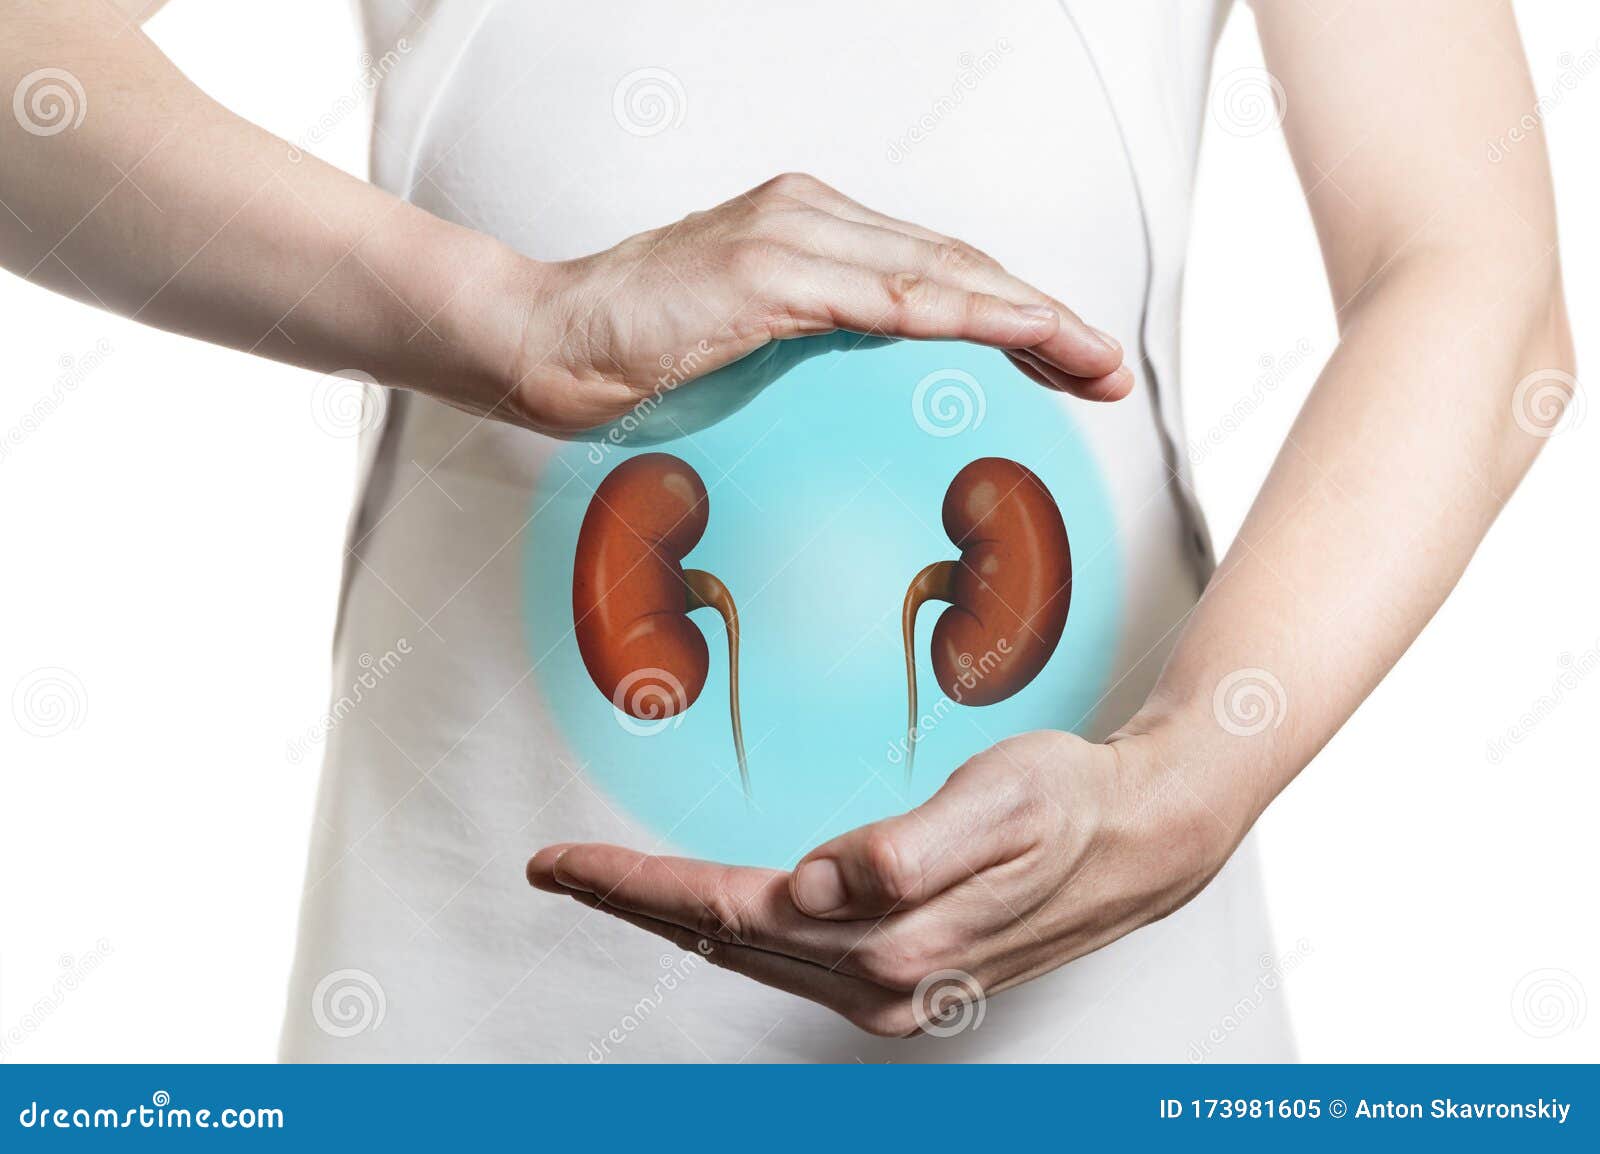 concept of healthy kidneys and  organ donation